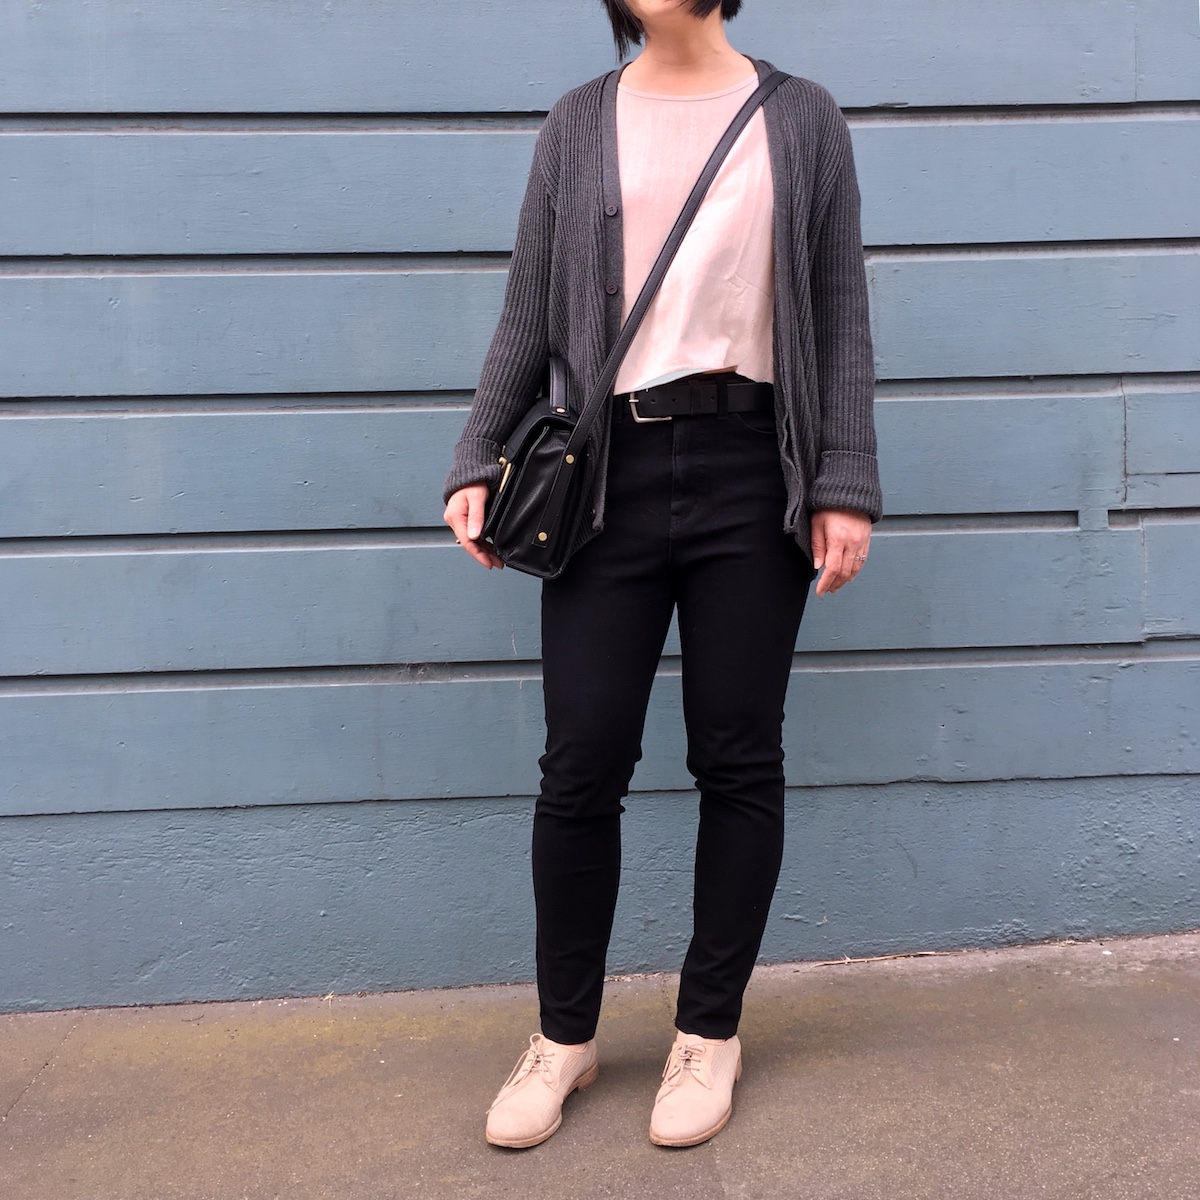 A woman, her head not in the frame, wearing an oatmeal-colored cropped shirt, black jeans, and a gray cardigan. She is also wearing a black purse cross body and is standing in front of blue siding.